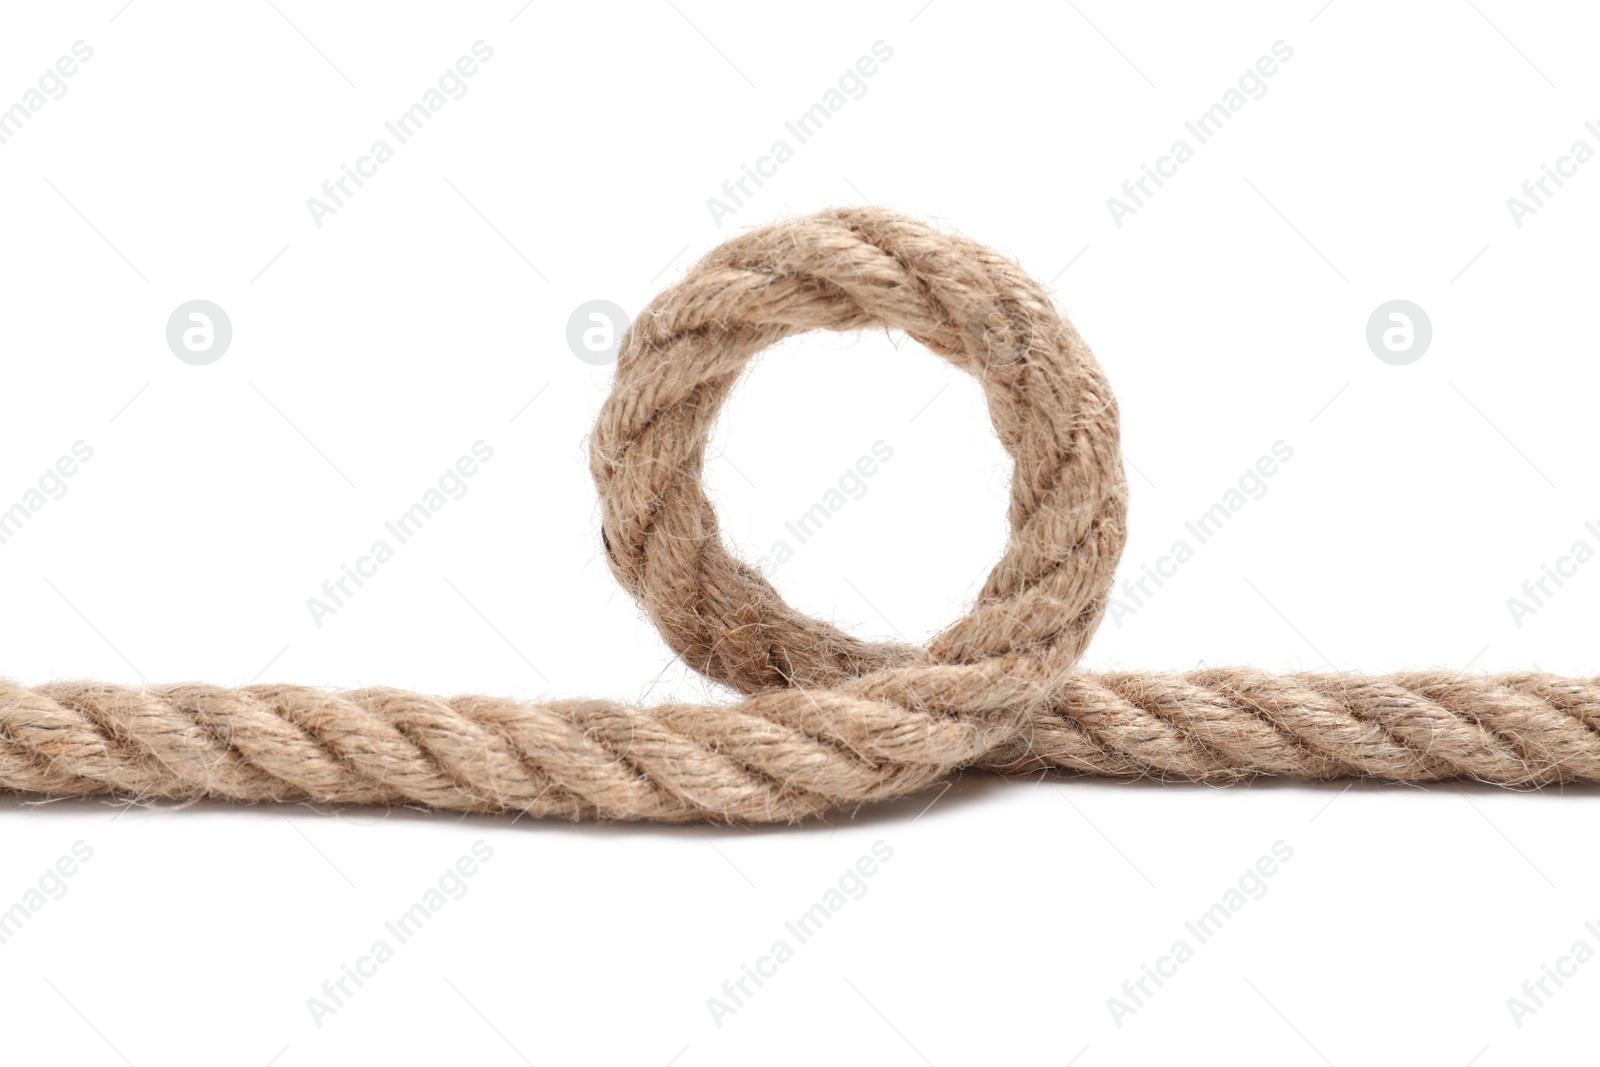 Photo of Loop made of cotton rope on white background